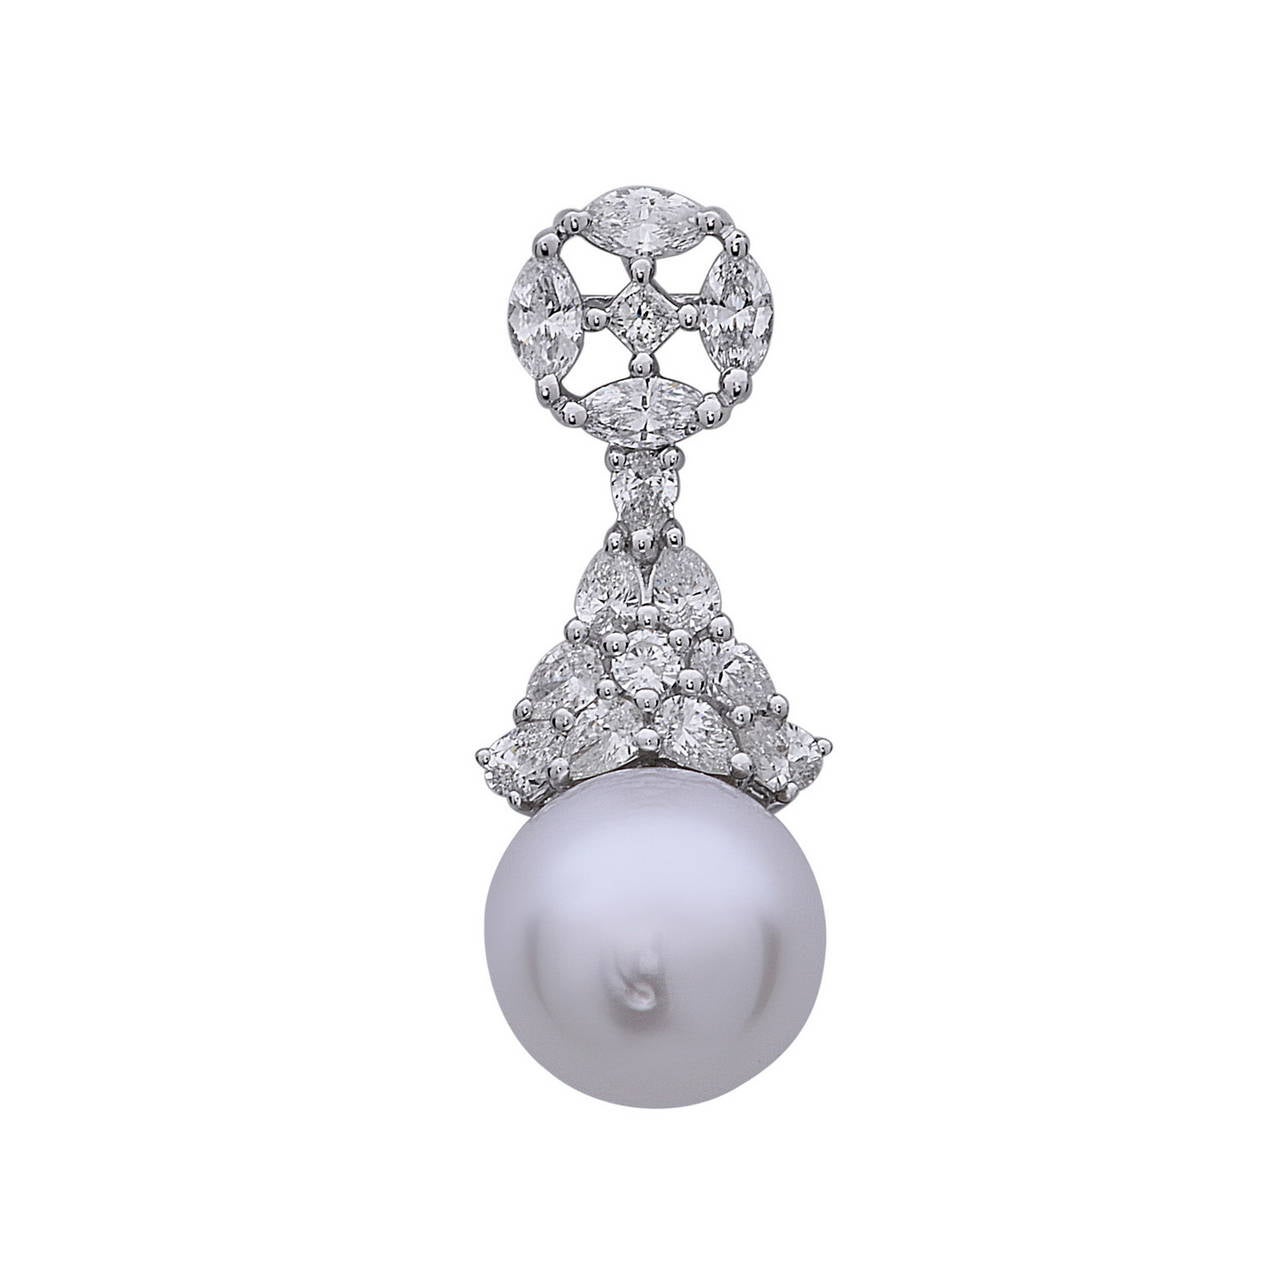 This alluring 18K White Gold set with Diamond & South Sea Pearl can make you the star of the evening. Yes, we do have matching necklace to go with this. 
Diamond weight: 2.66cts, Quality: G color S1 
Pearl: South Sea Cultured 12mm